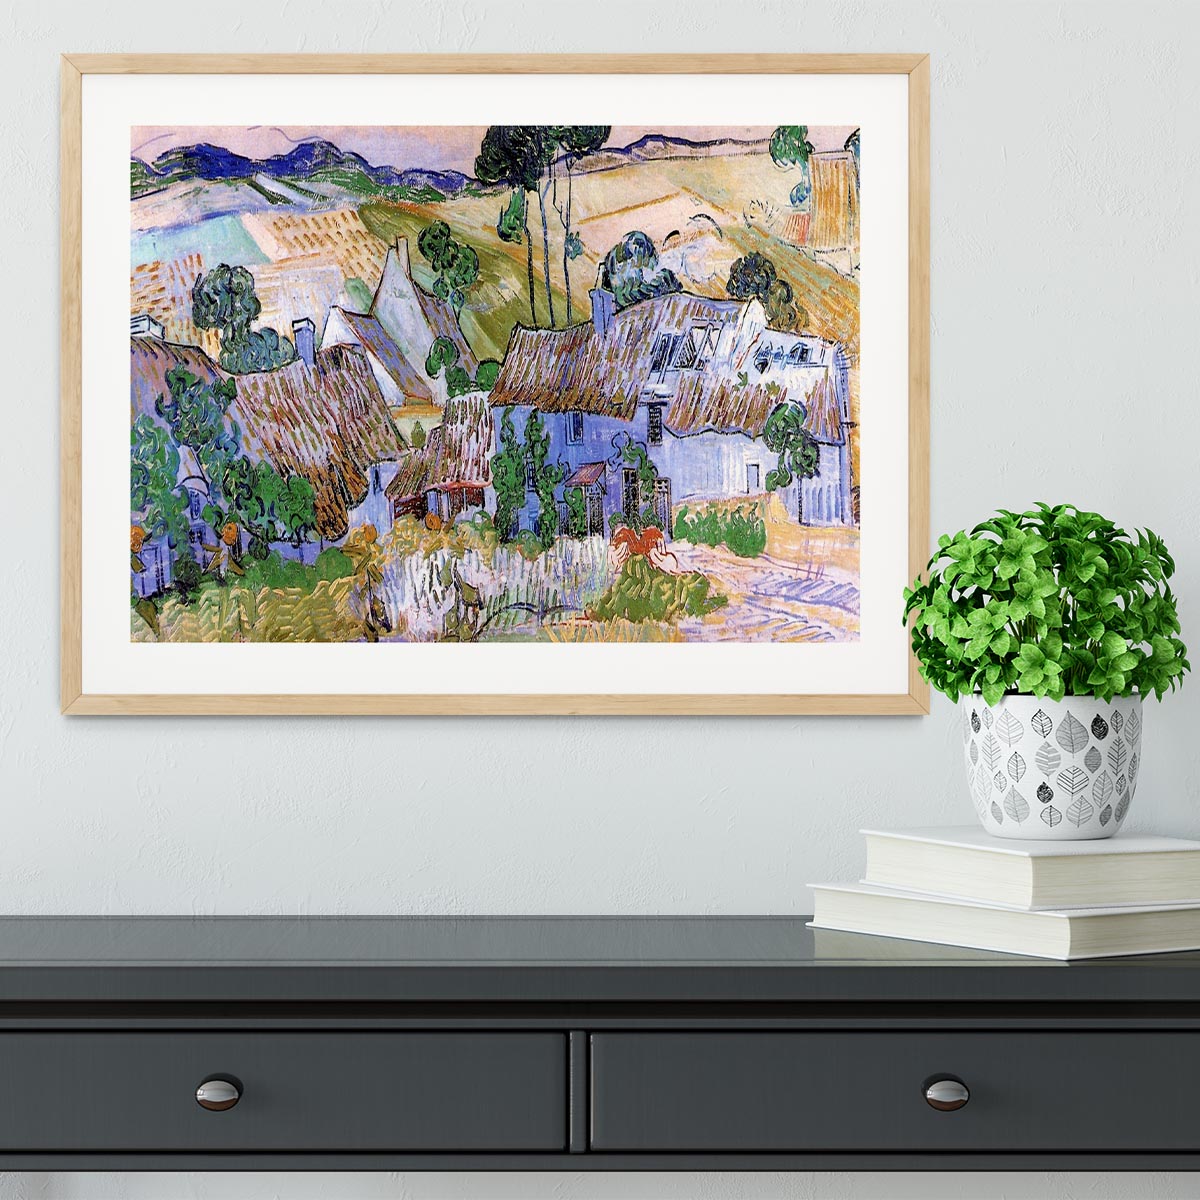 Thatched Cottages by a Hill by Van Gogh Framed Print - Canvas Art Rocks - 3